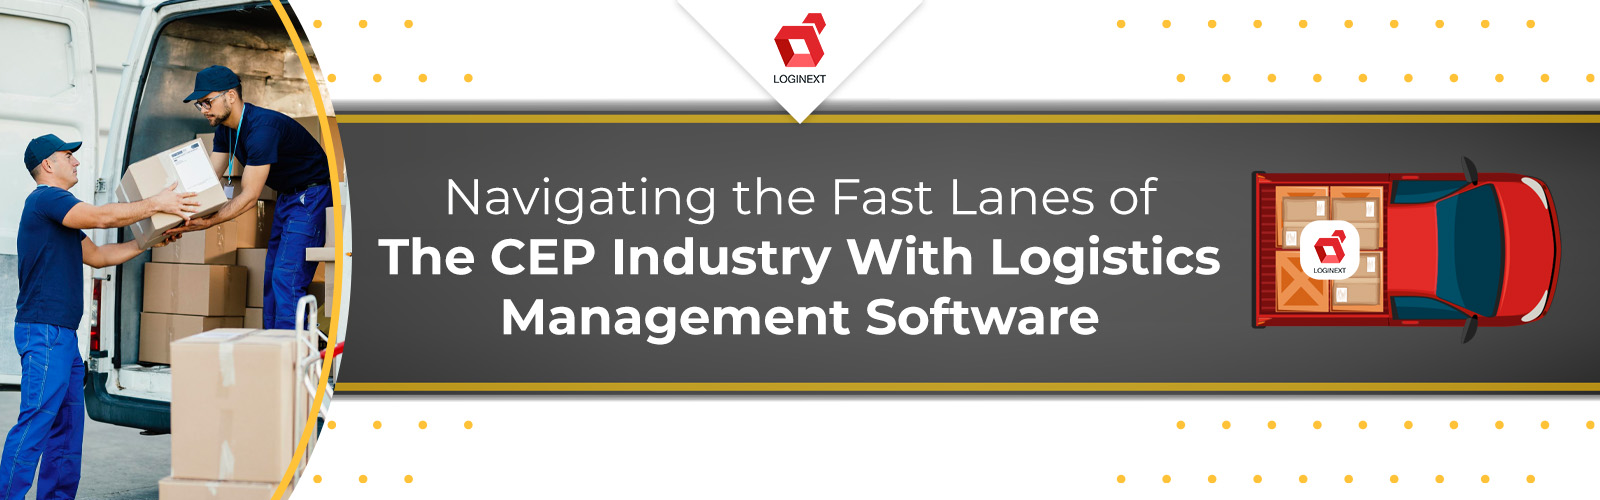 Navigating the Fast Lanes of the CEP Industry With Logistics Management Software